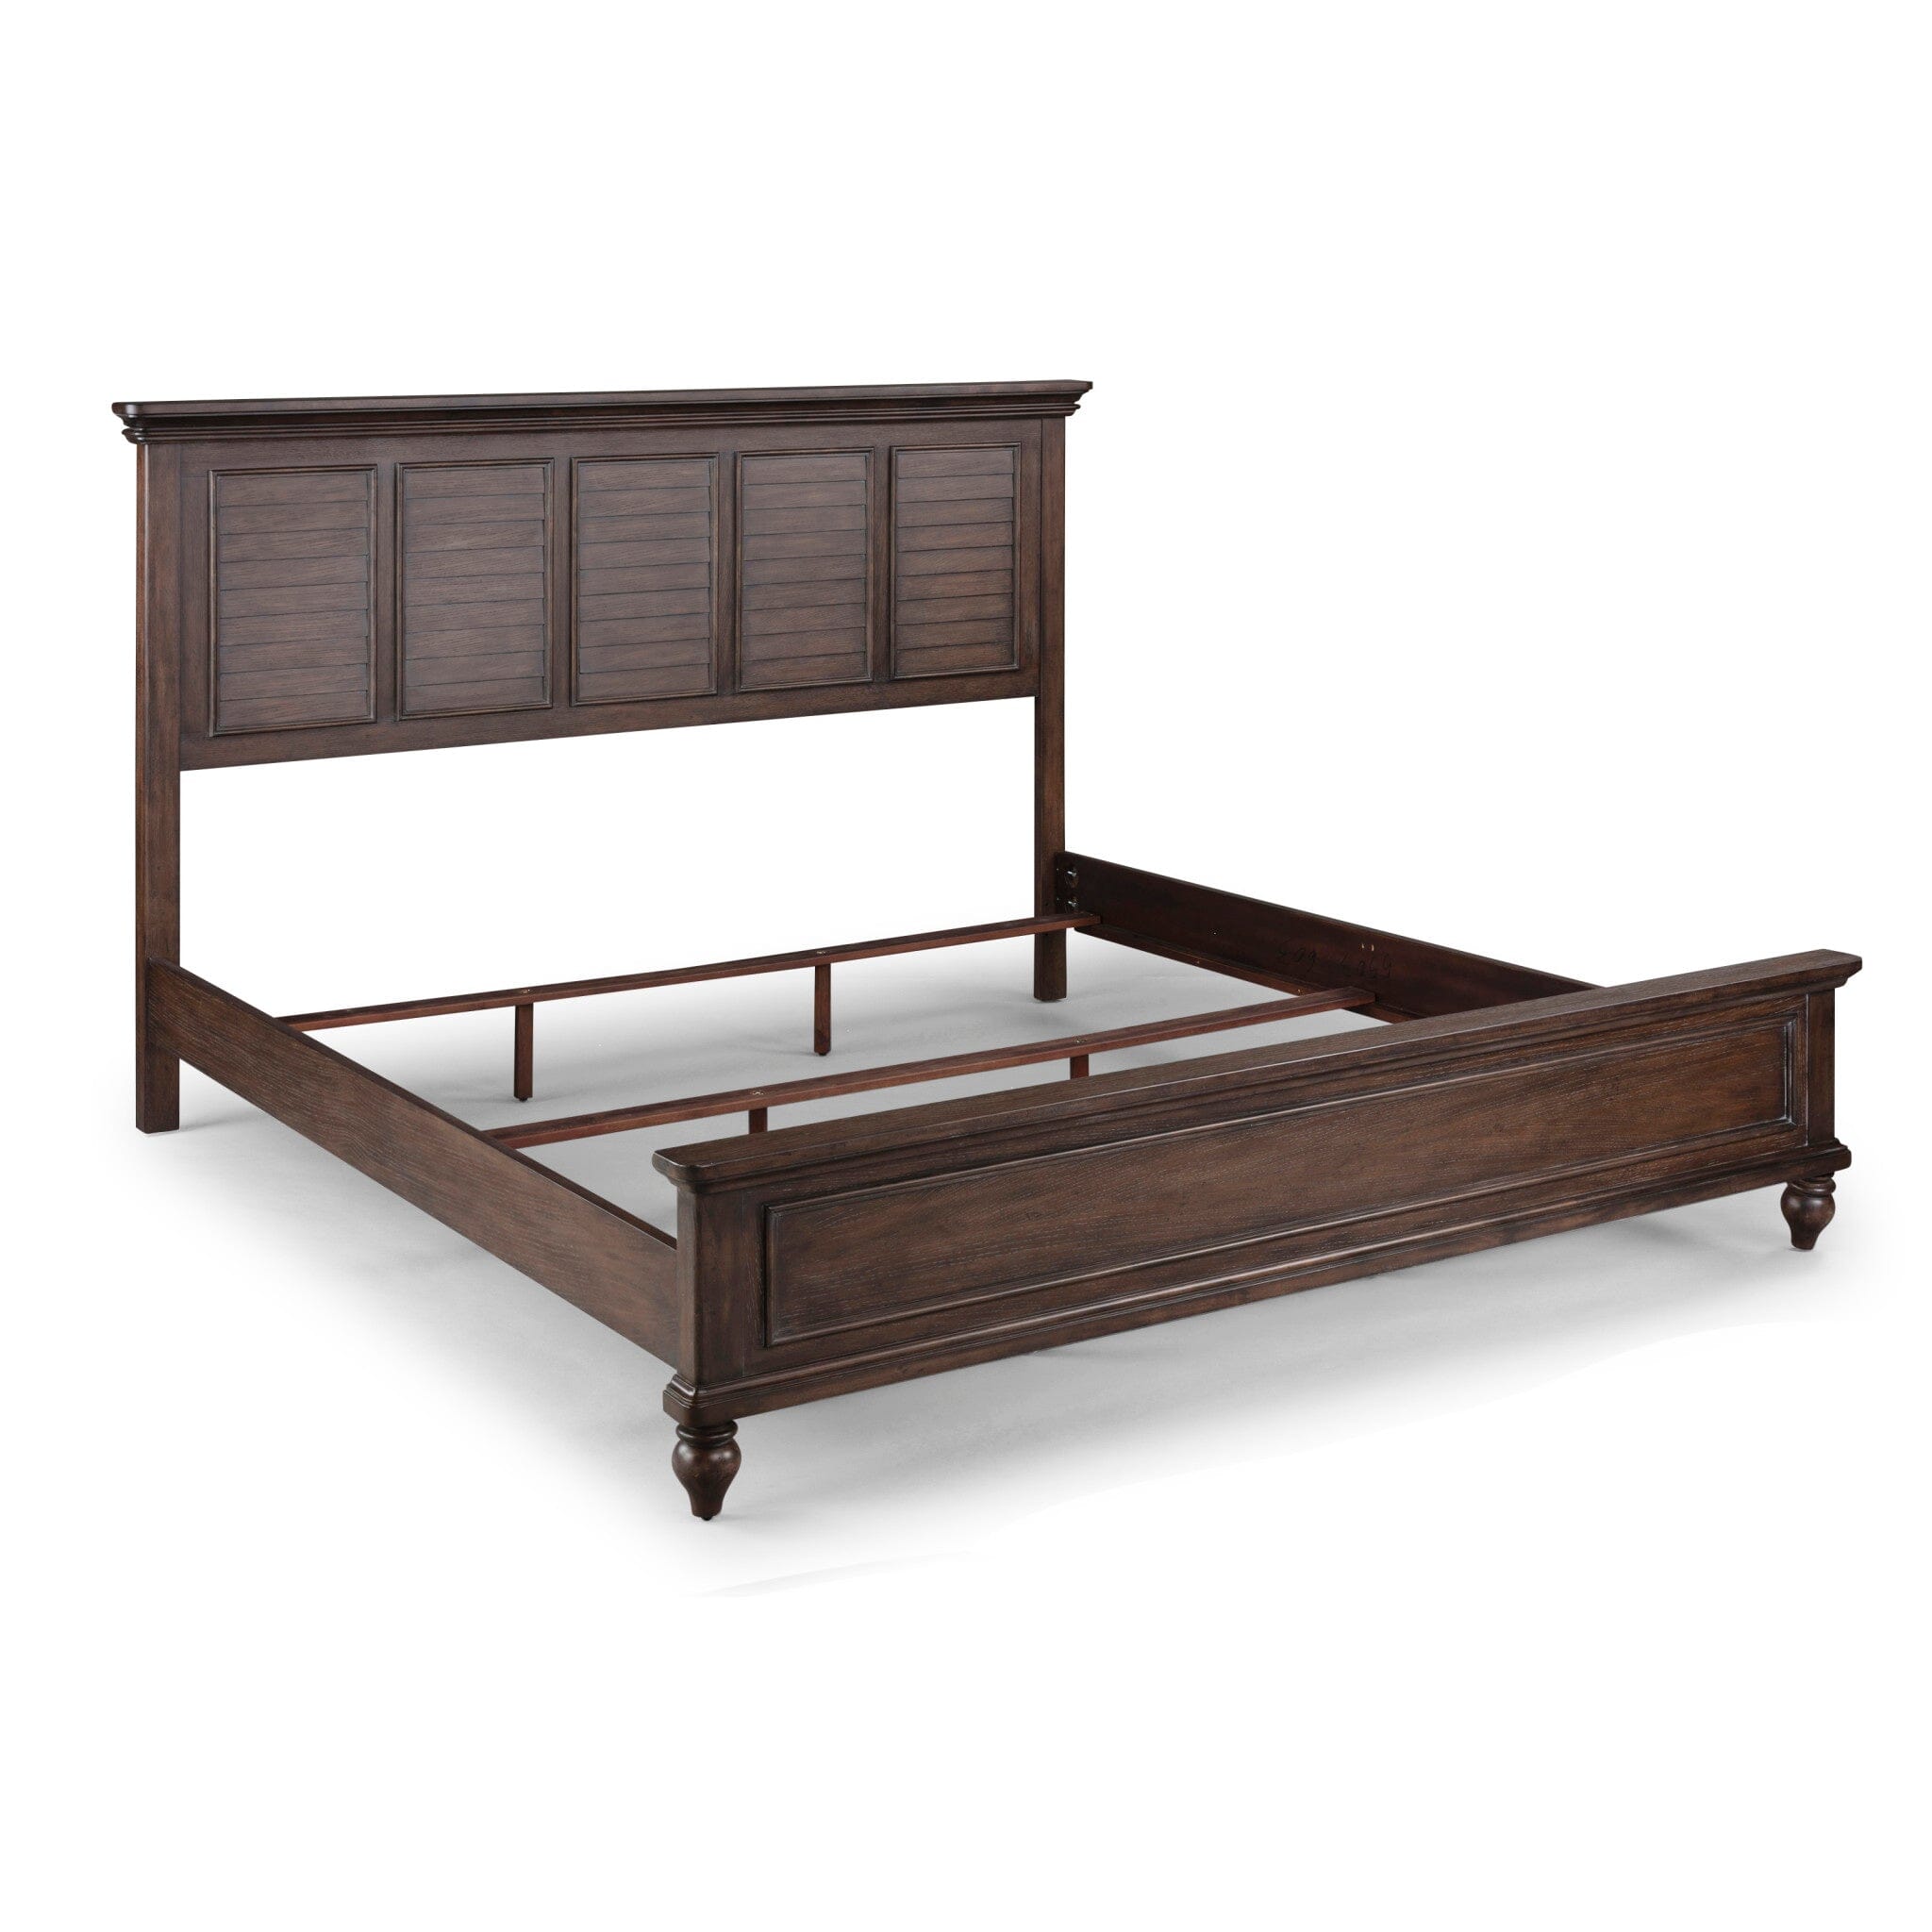 Coastal King Bed By Southport King Bed Southport